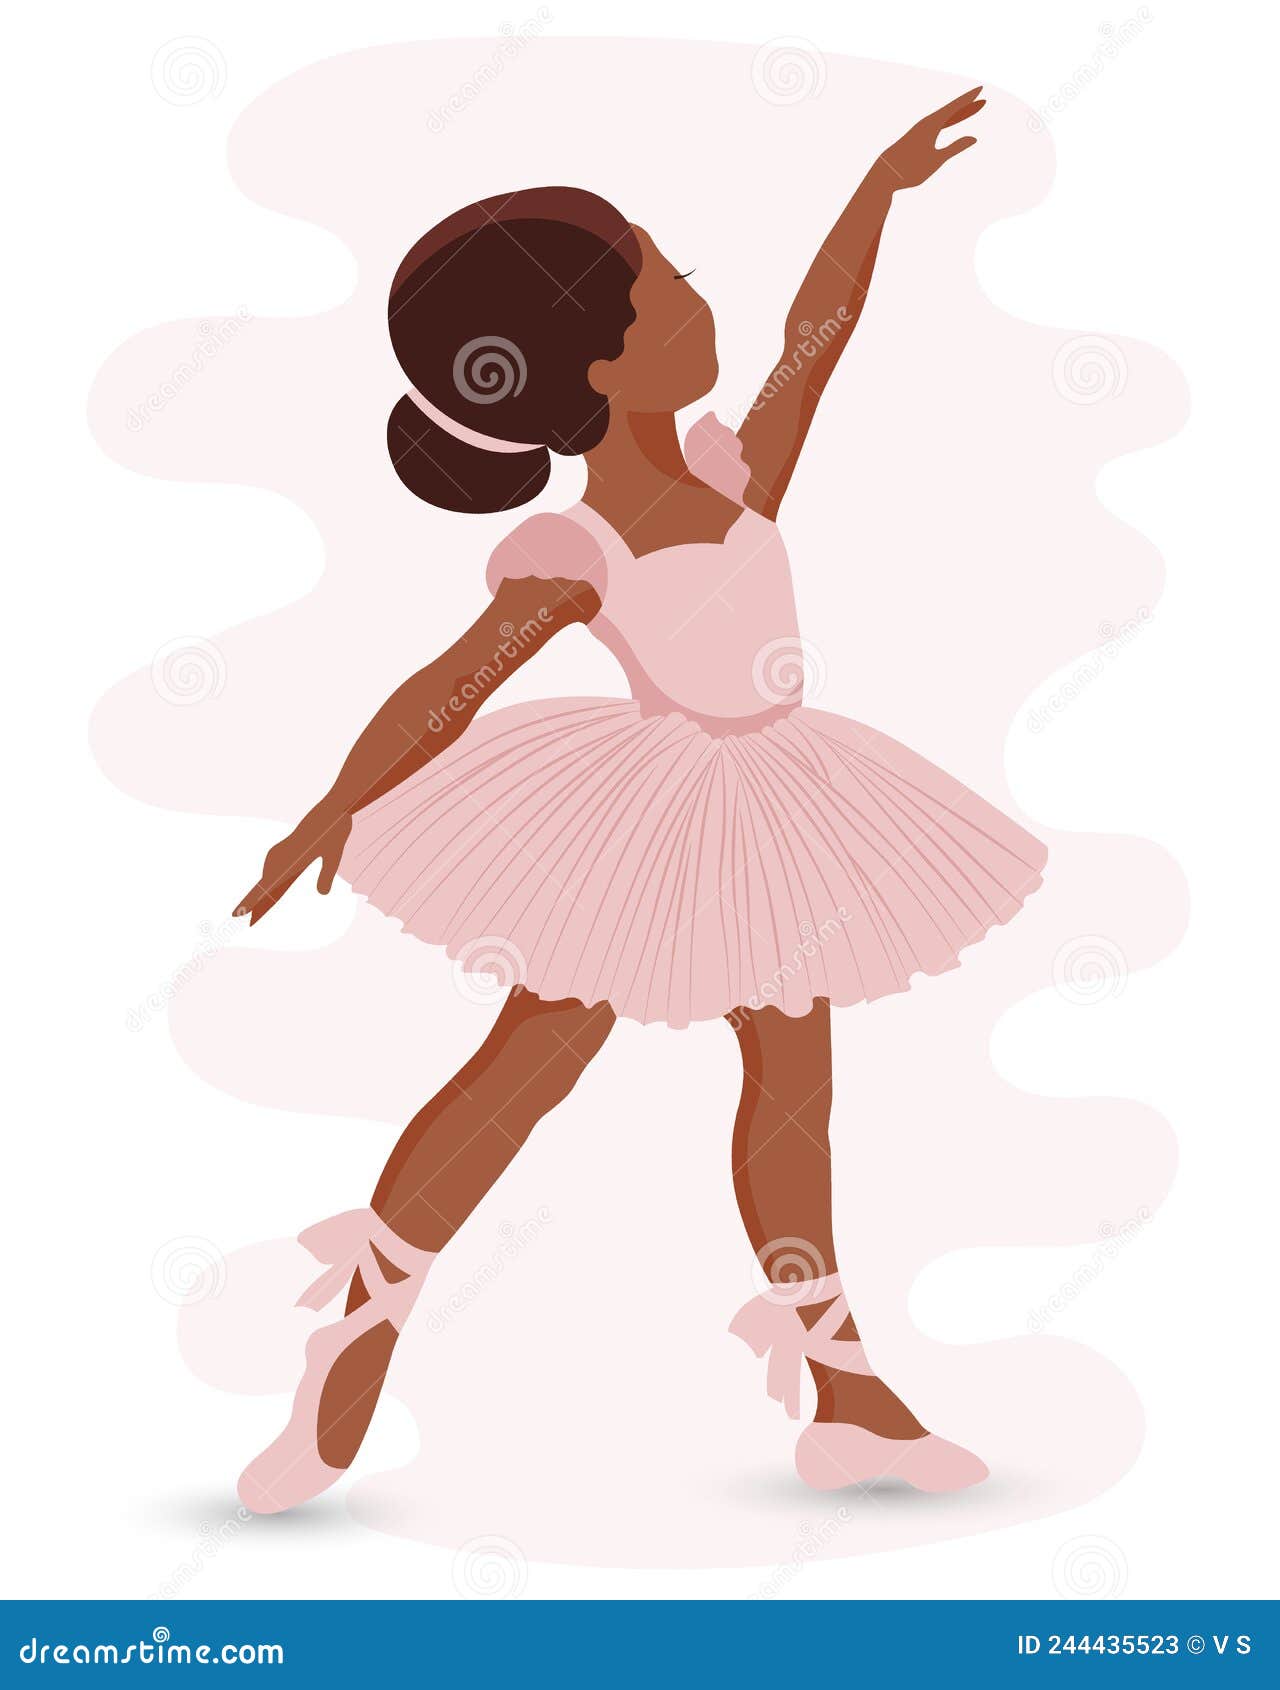 Illustration, a little girl ballerina in a pink dress and pointe shoes with ribbons. The girl is dancing. Print, clip art, vector